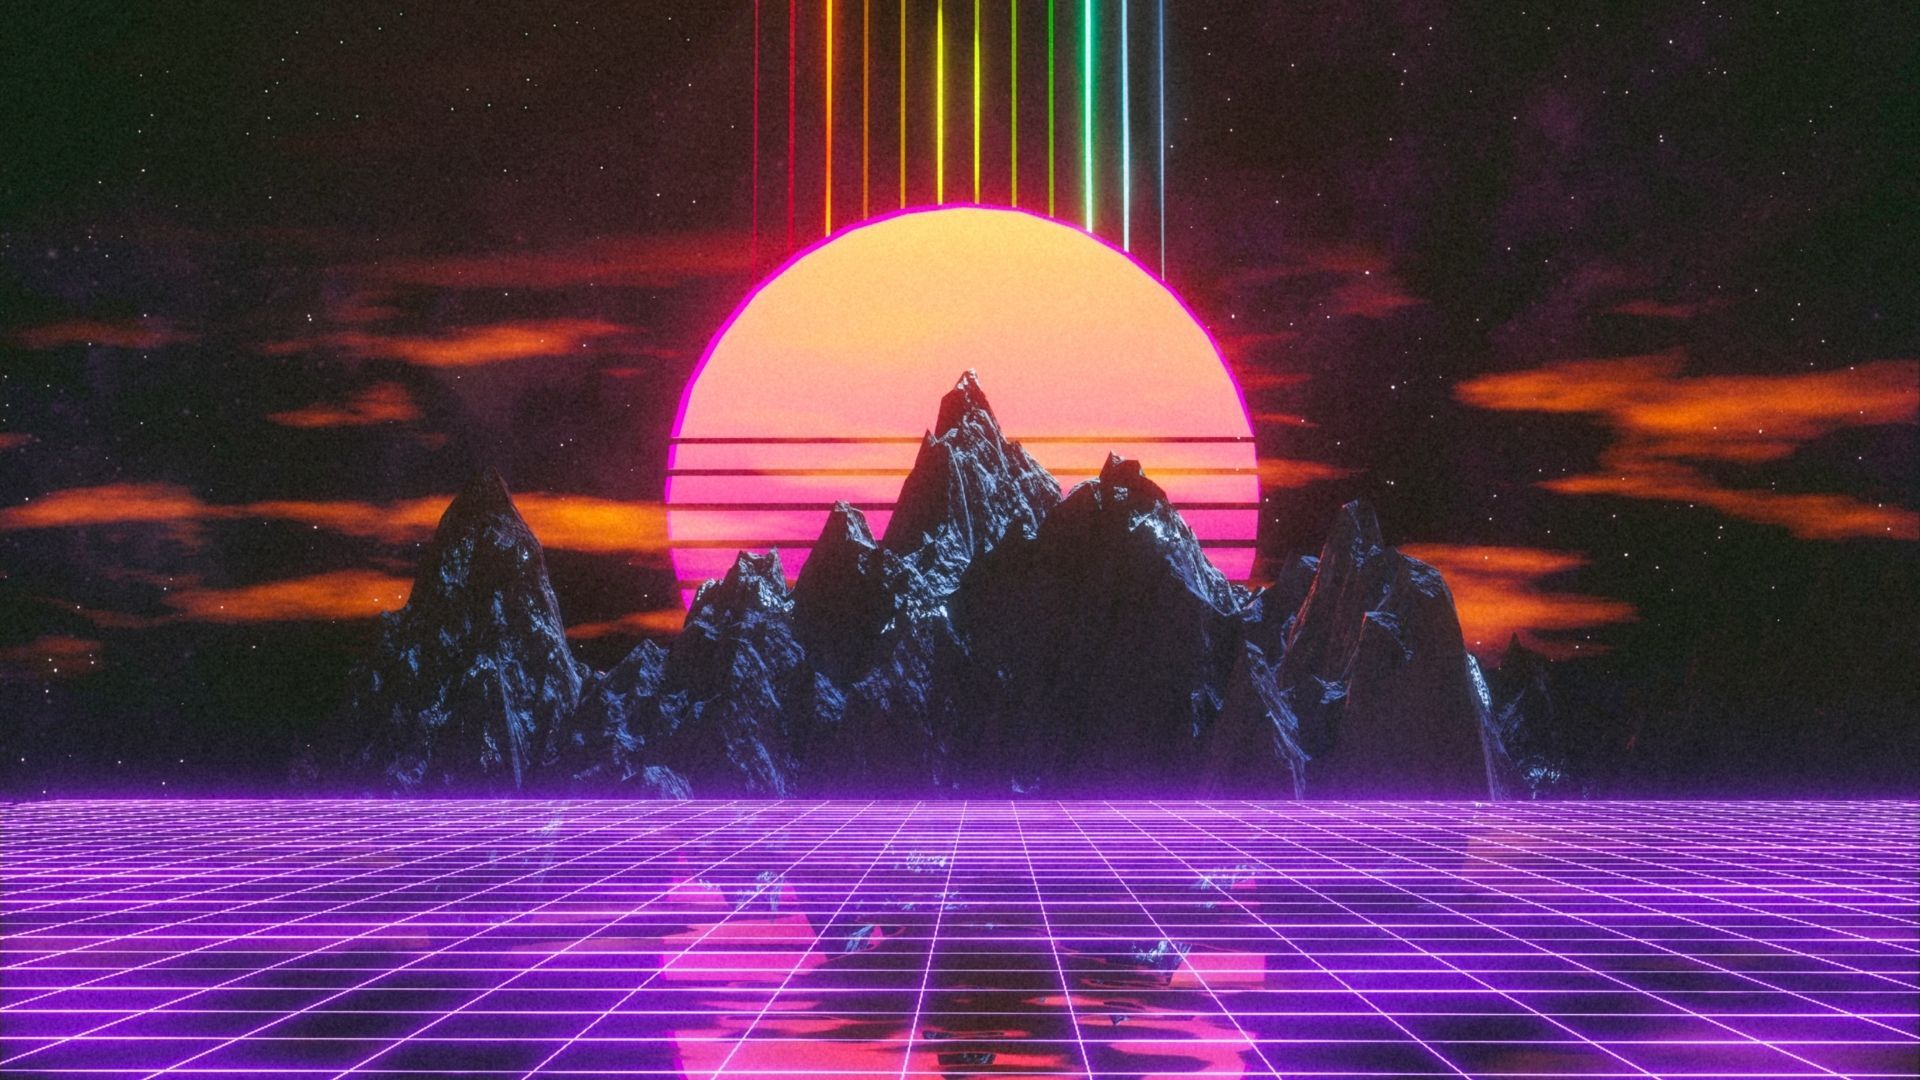 80s retro wave wallpaper with mountains and a sunset - 1920x1080